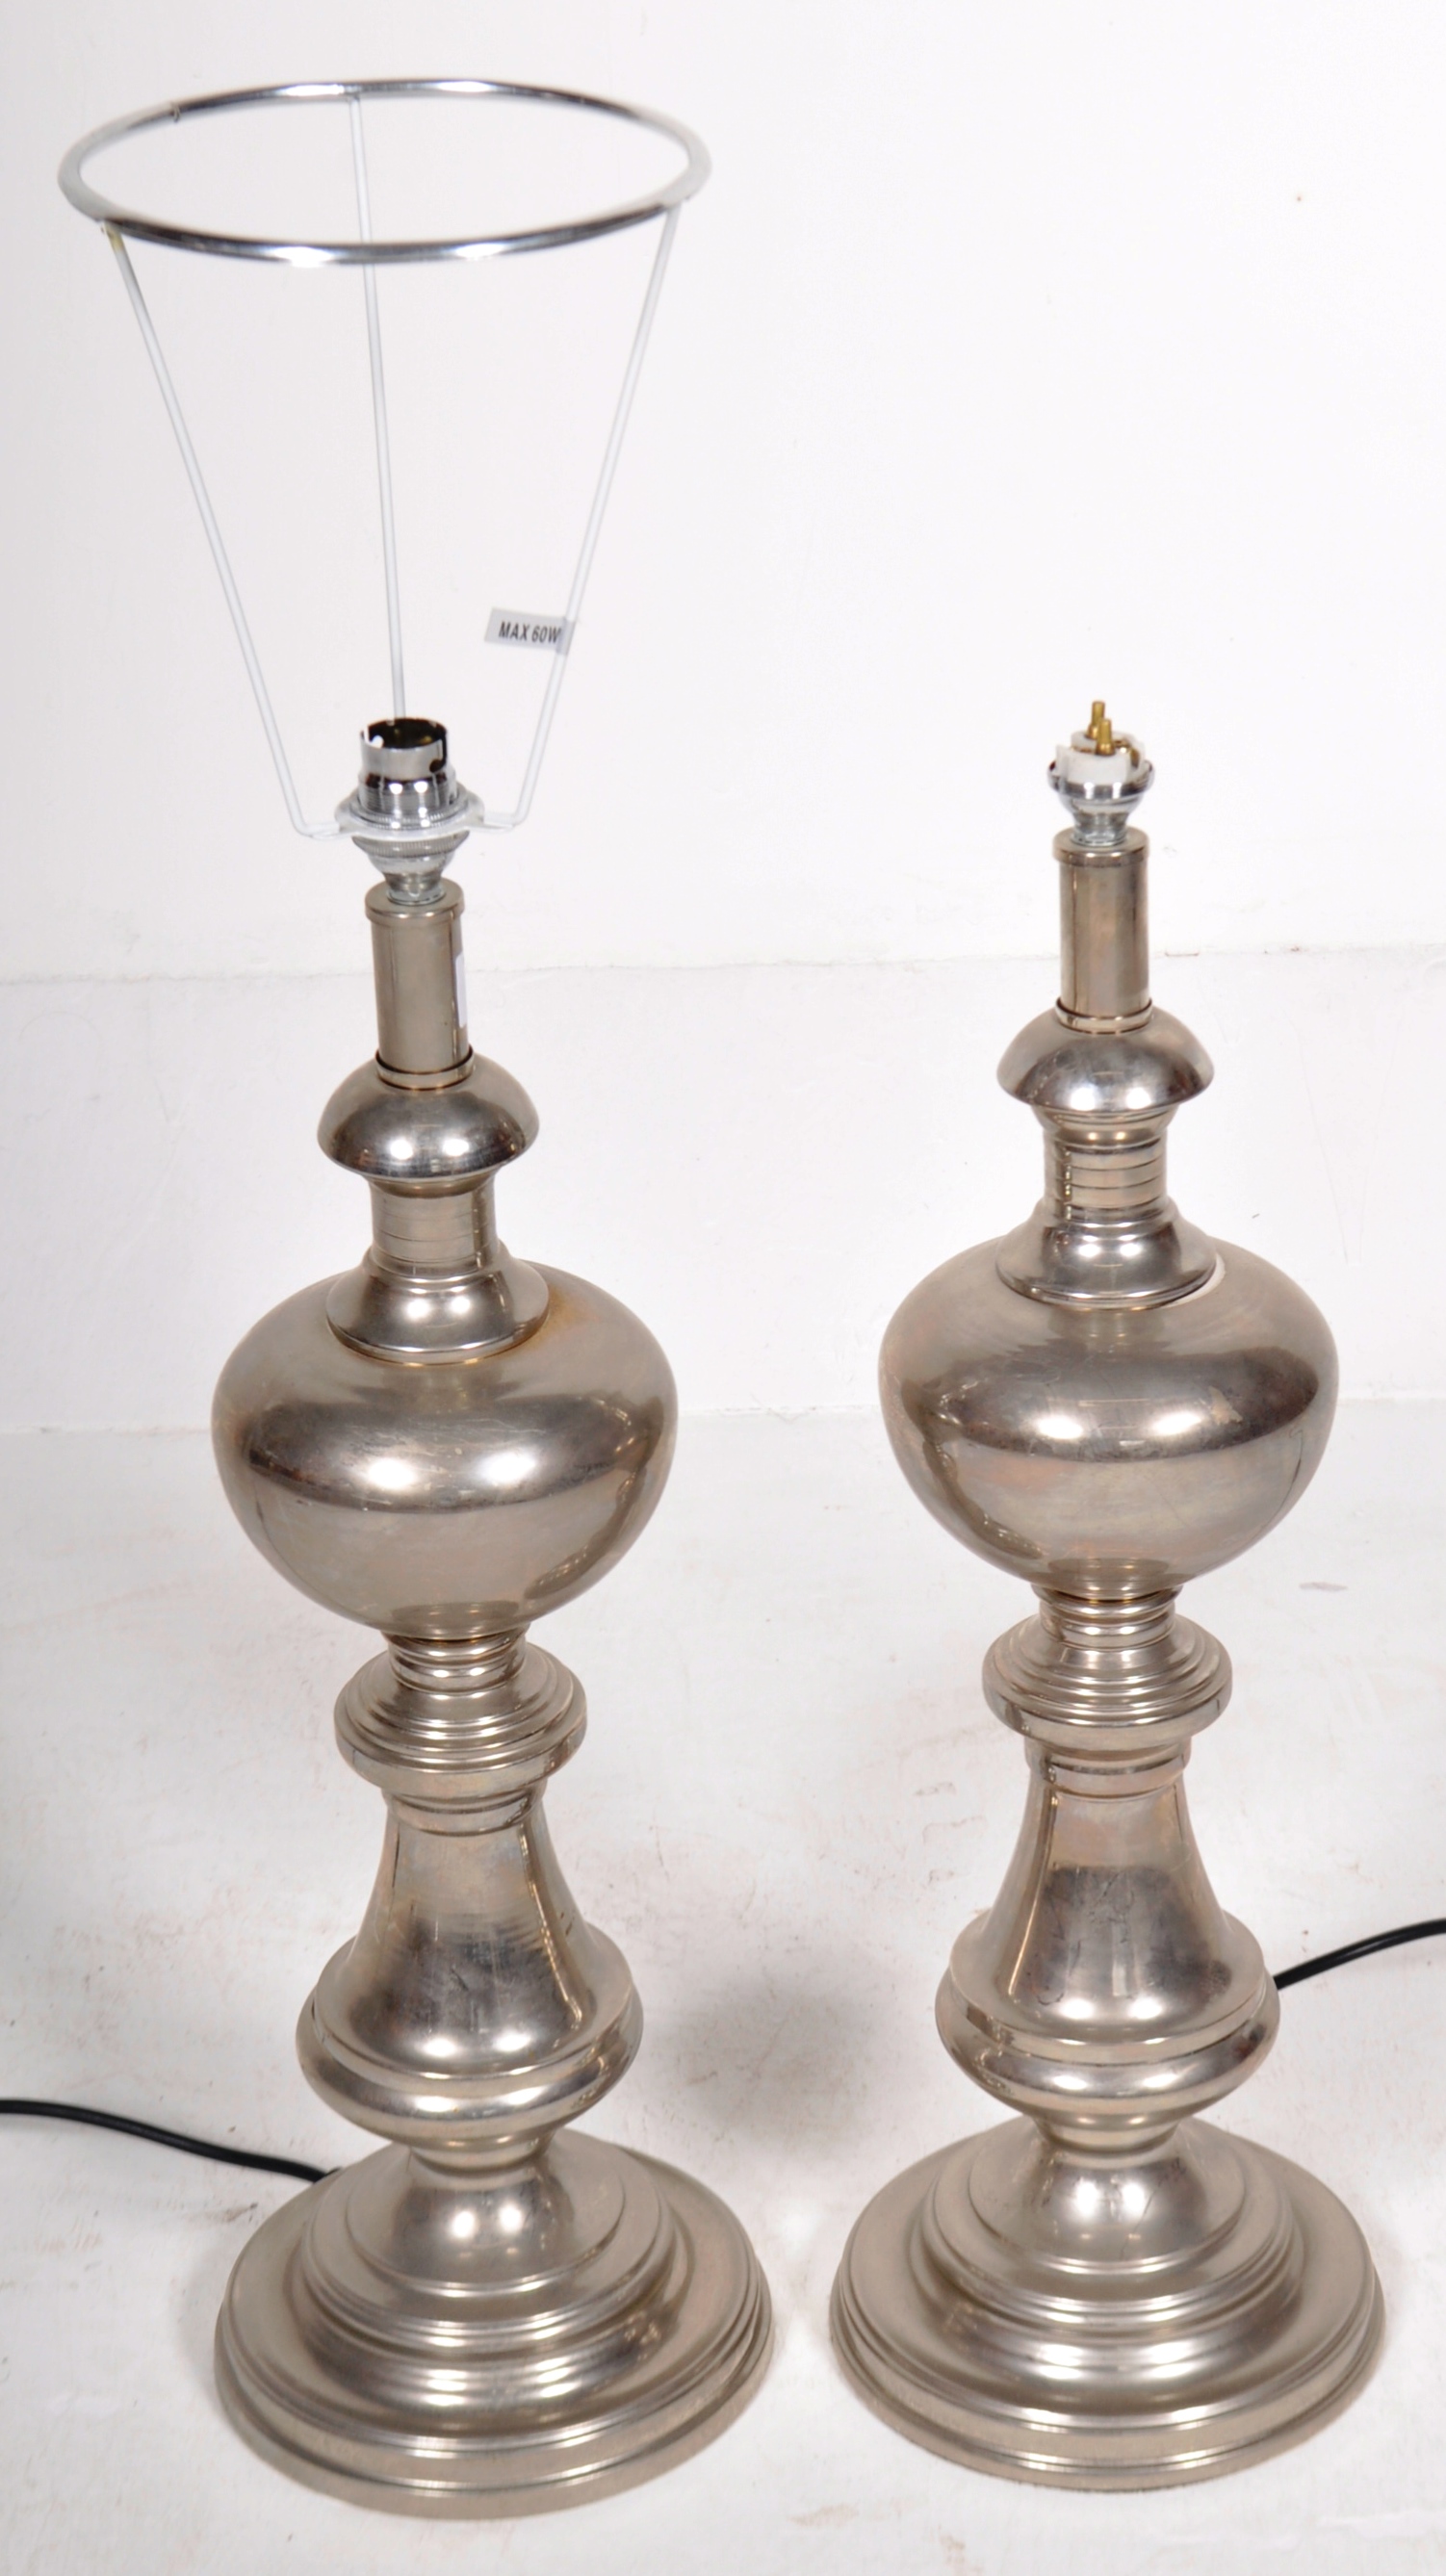 MATCHING PAIR OF CONTEMPORARY POLISHED METAL TABLE LAMPS - Image 2 of 7